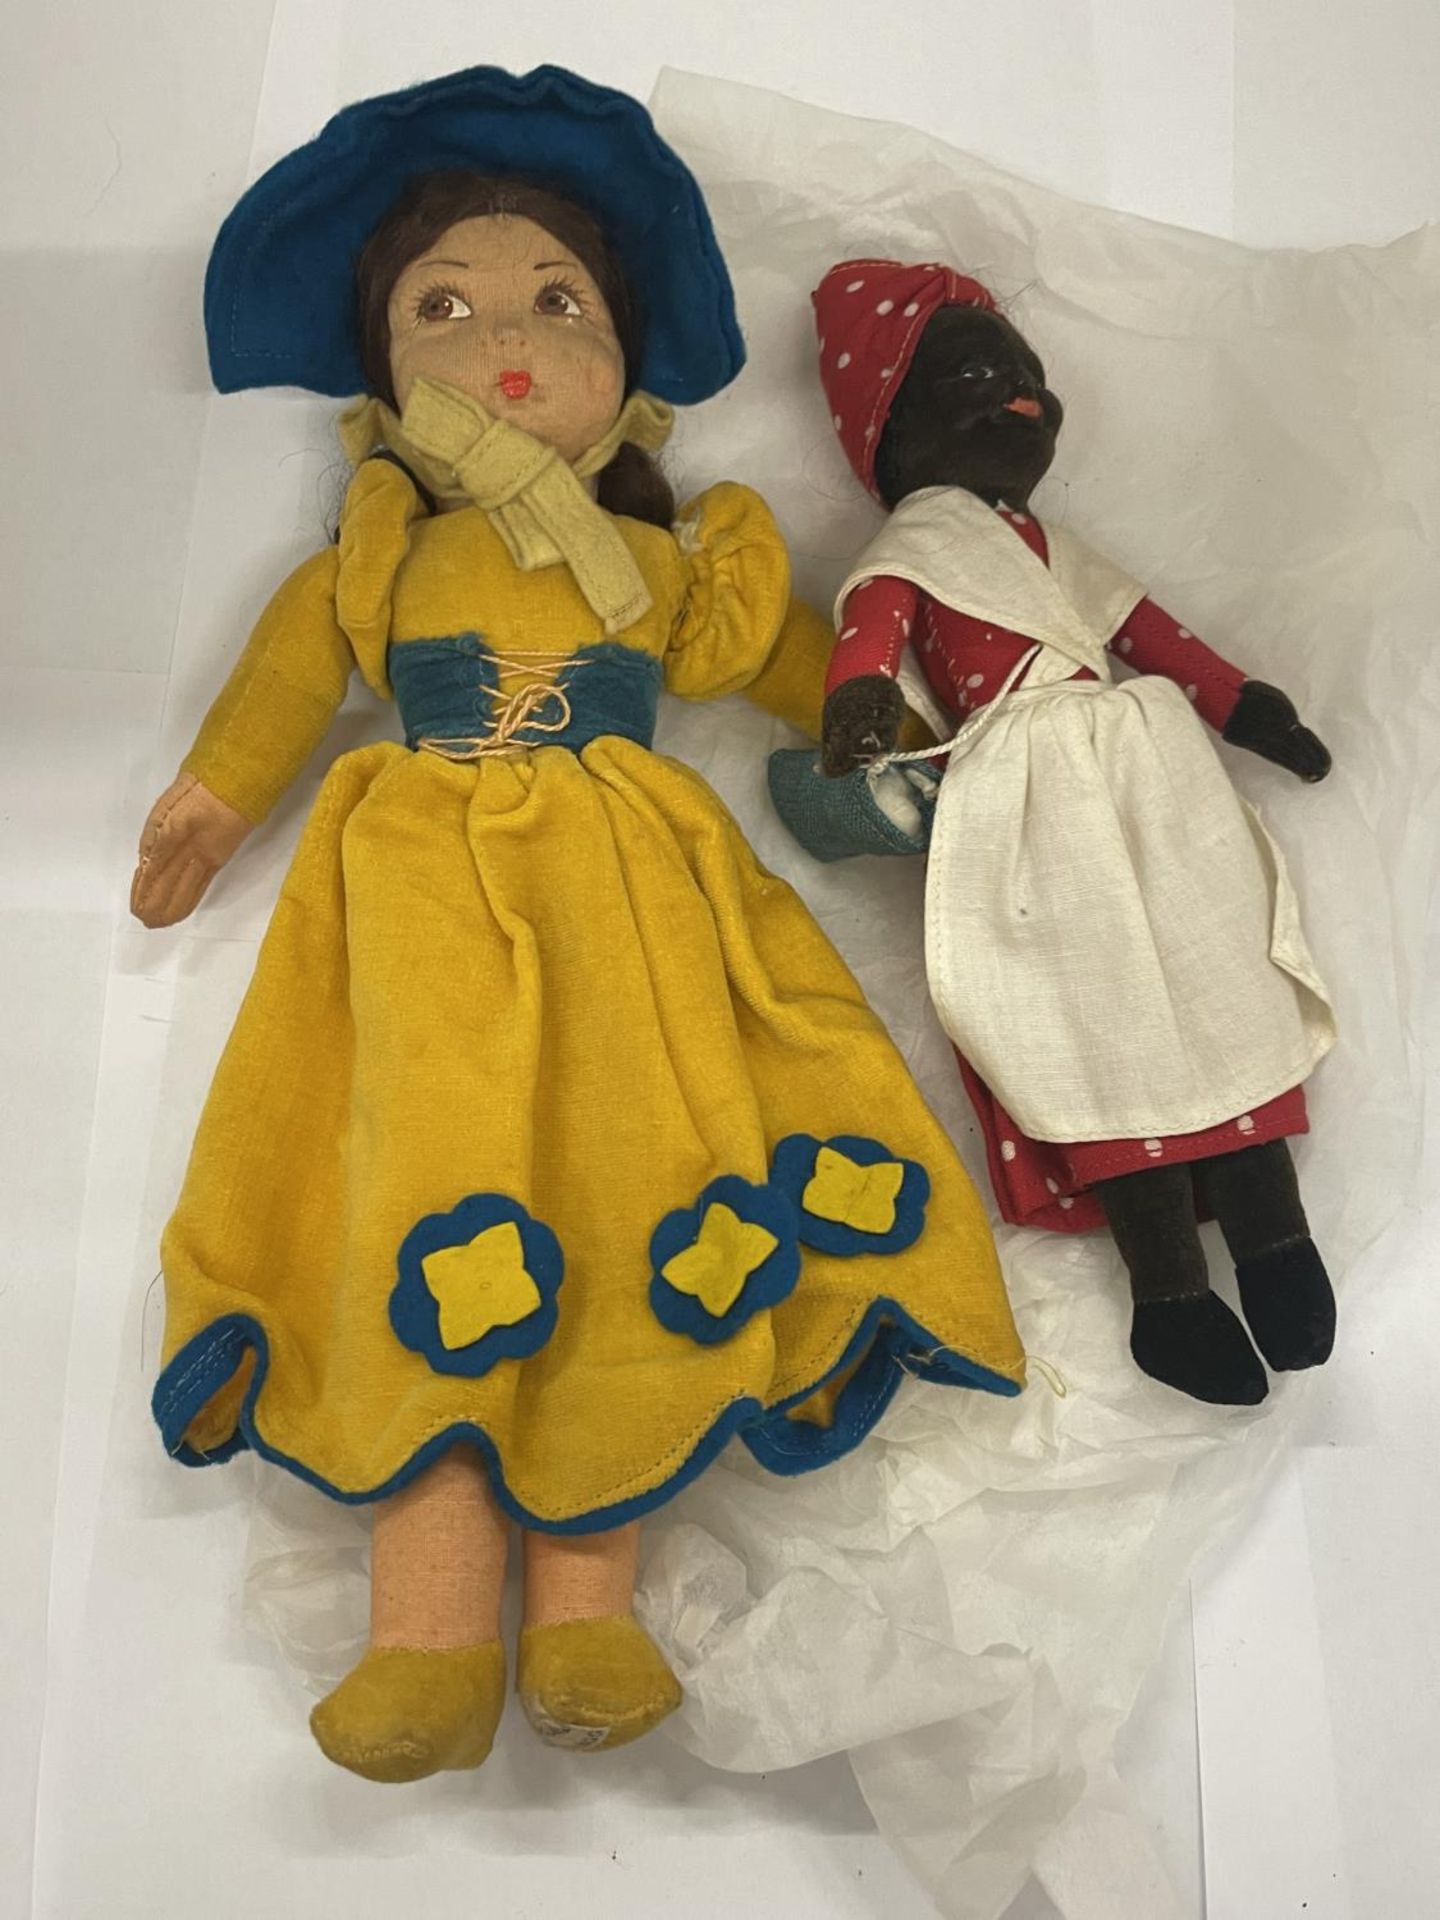 TWO VINTAGE NORAH WELLINGS CLOTH DOLLS WITH LABELS TO FEET TO INCLUDE ONE IN A YELLOW DRESS AND A